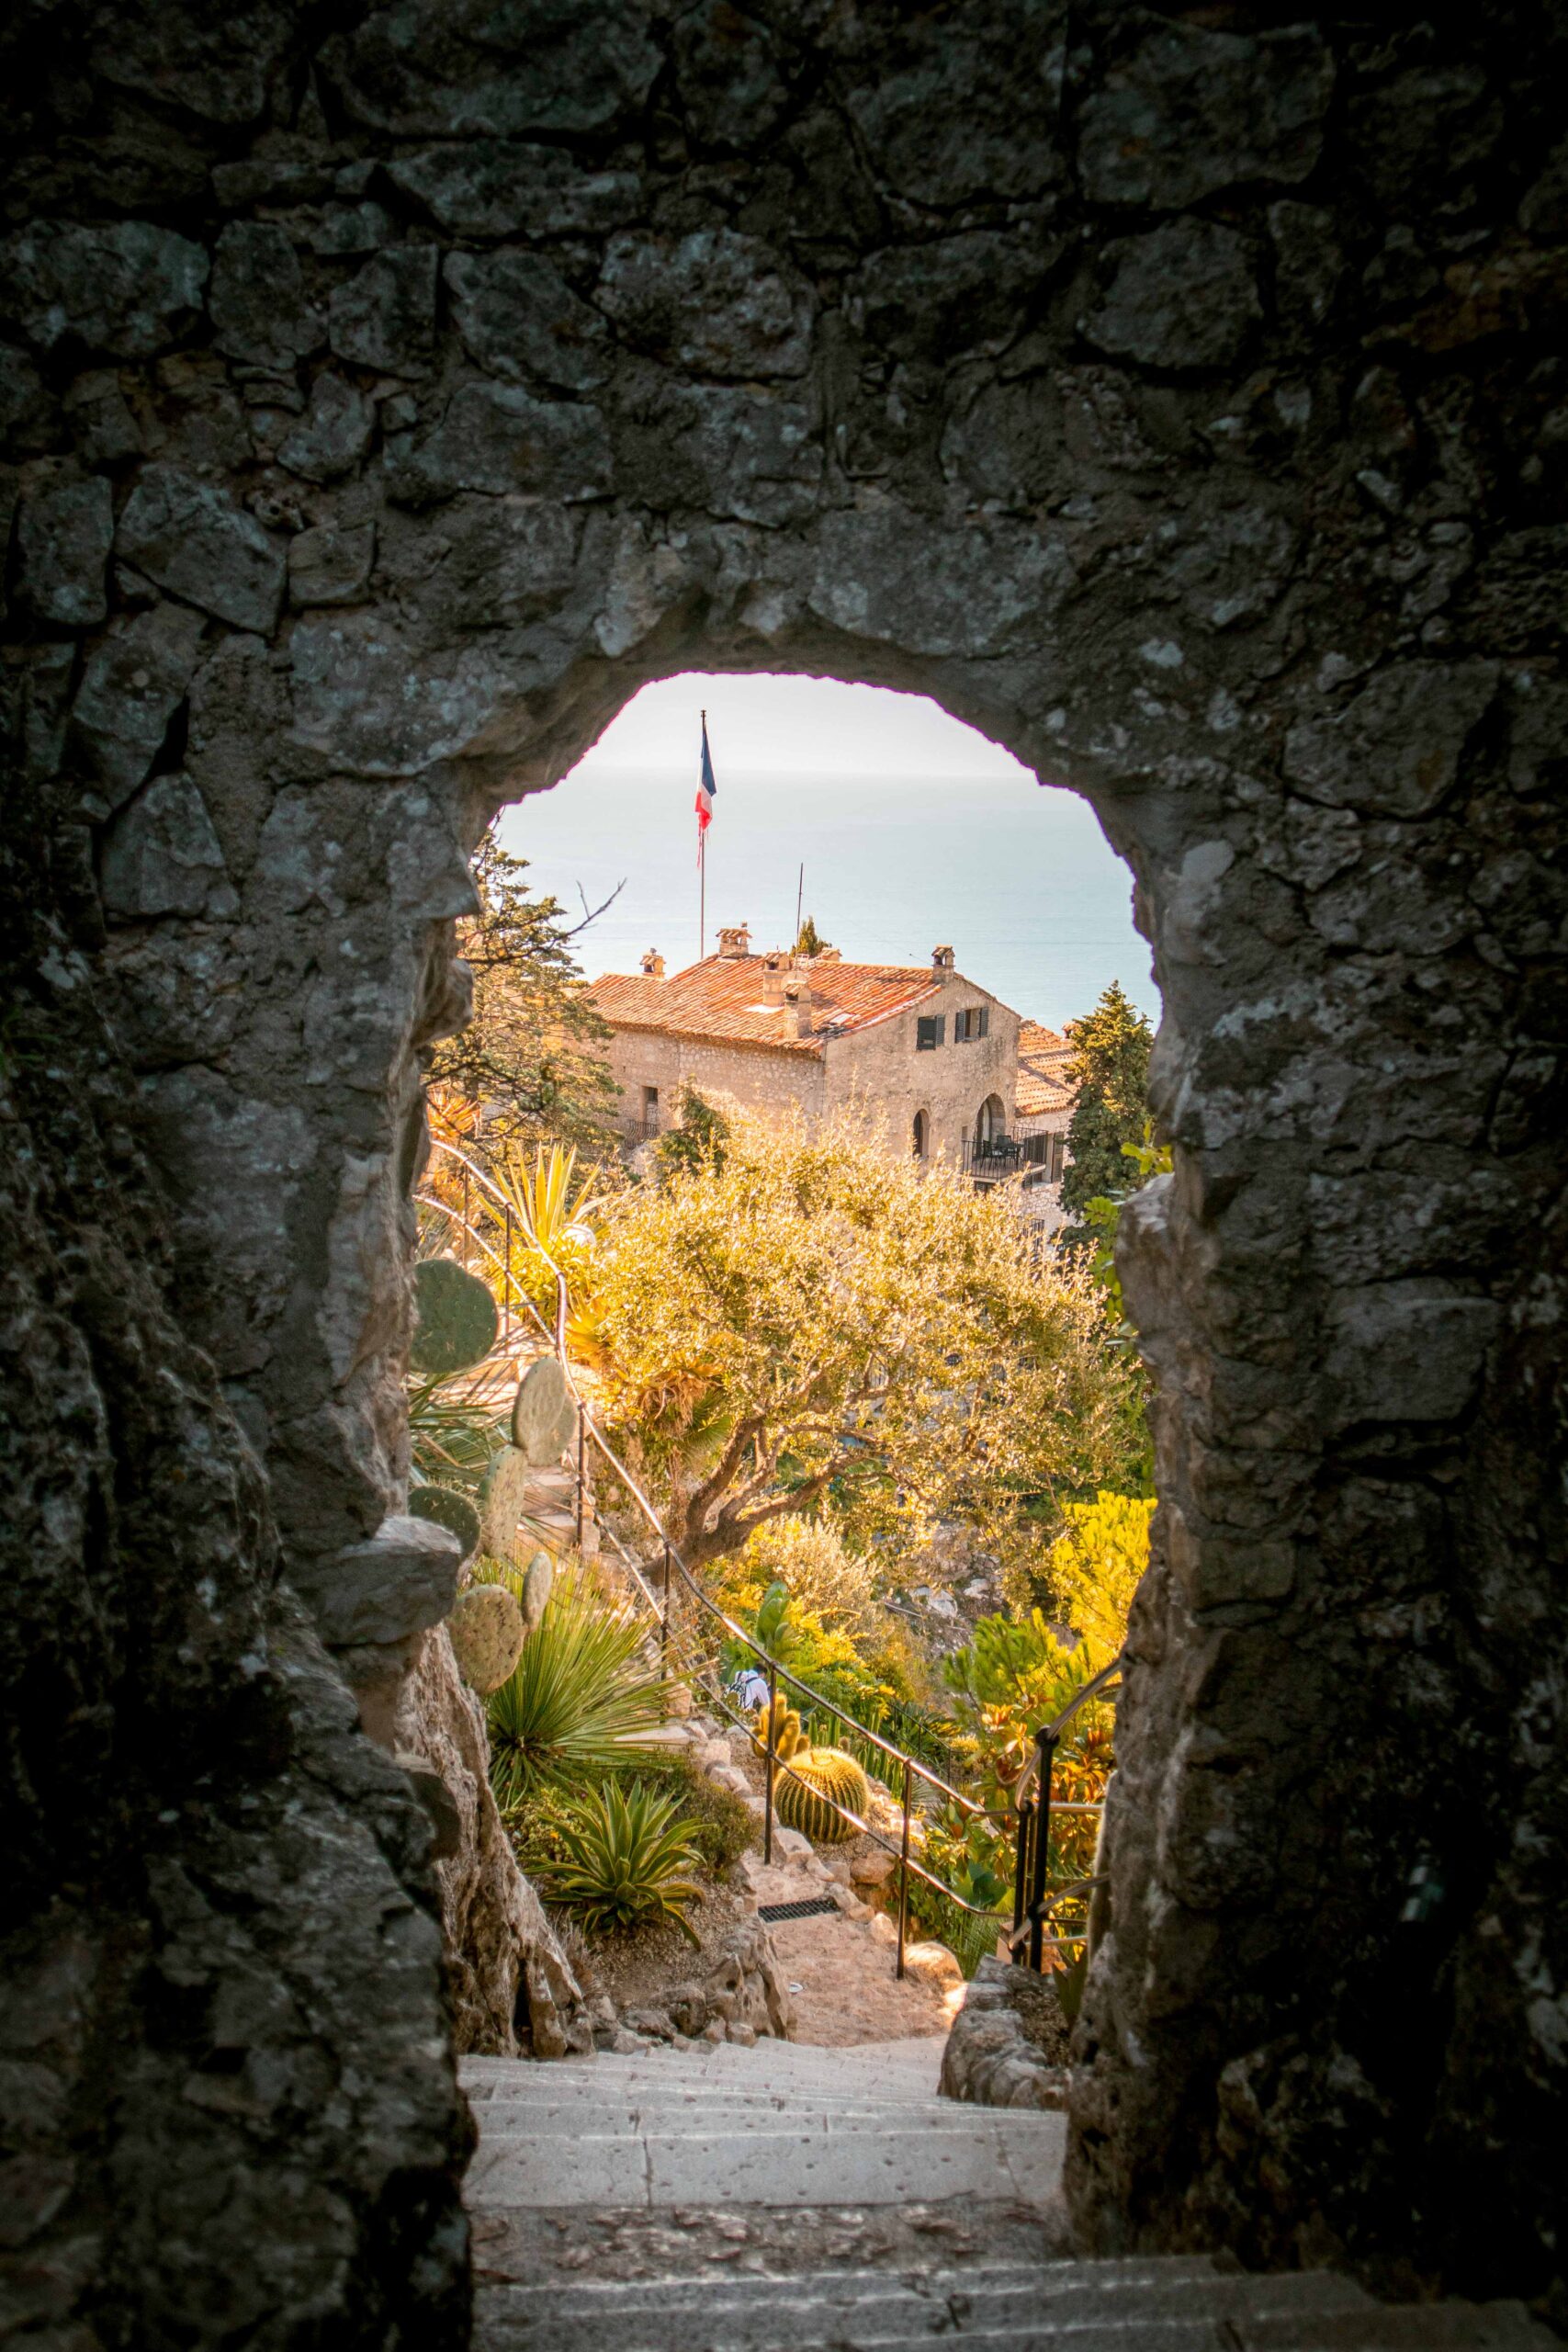 Staircase view of the Mediterranean sea and the Eze Exotic Garden on a sunny day from the window of a stone arch in Eze Village, France